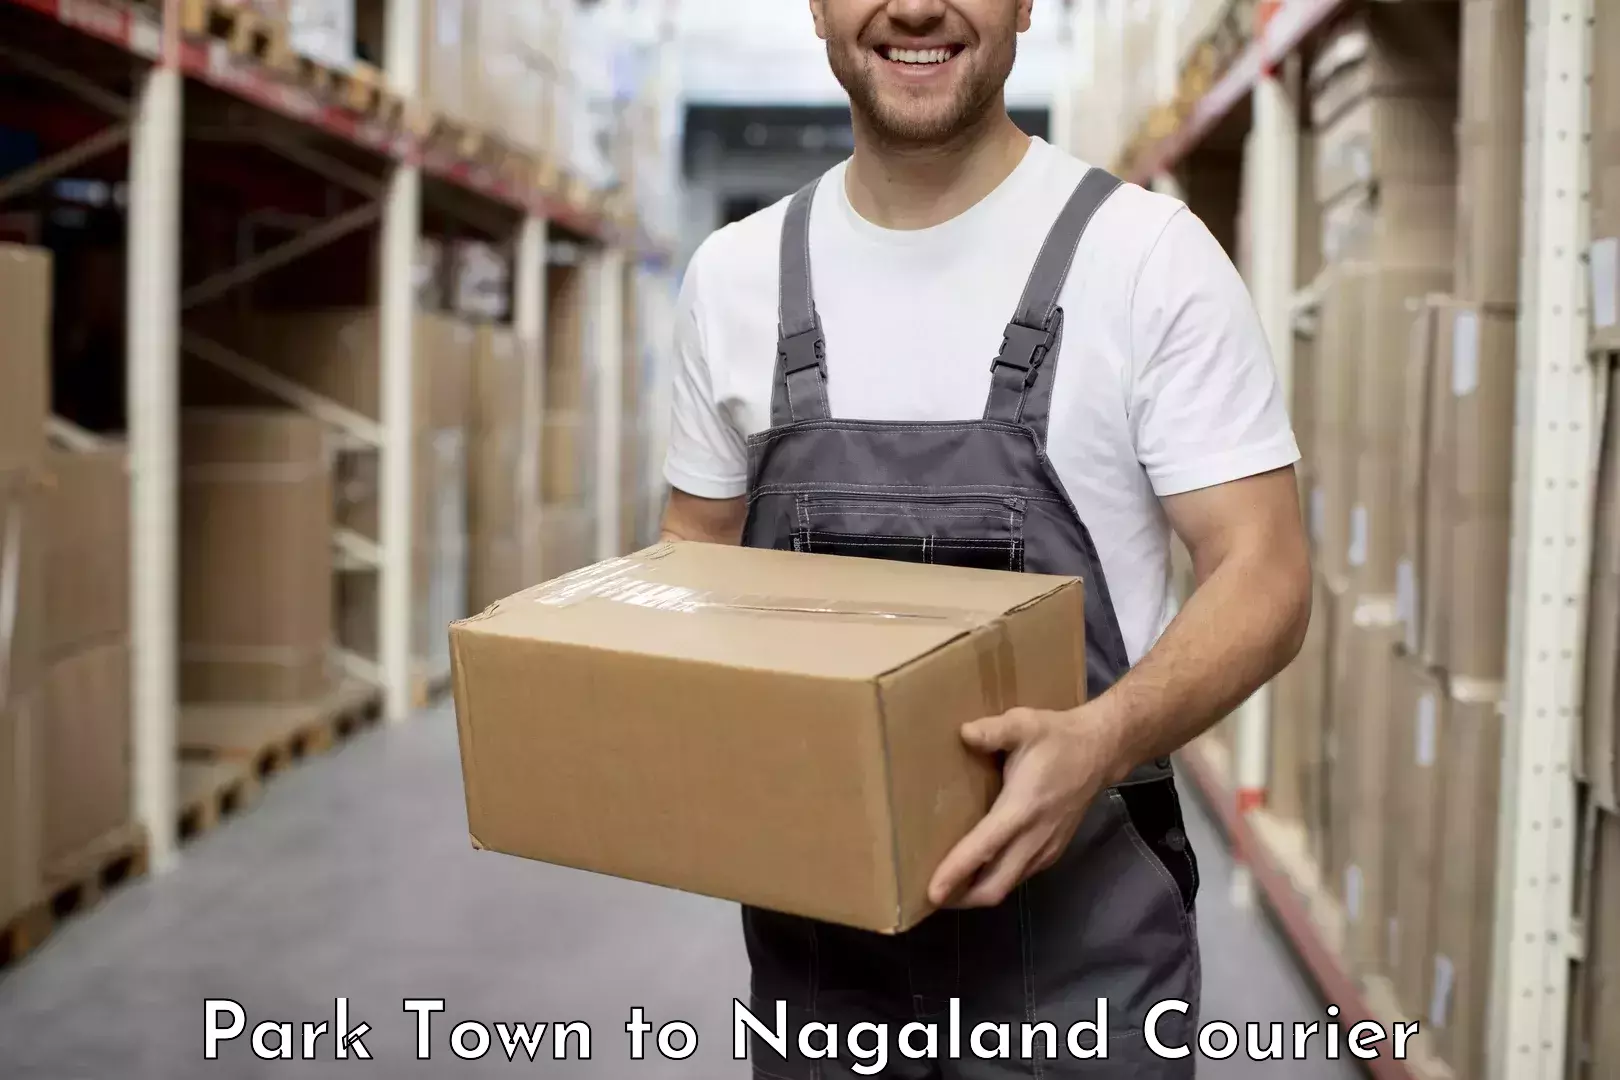 High value parcel delivery in Park Town to Nagaland